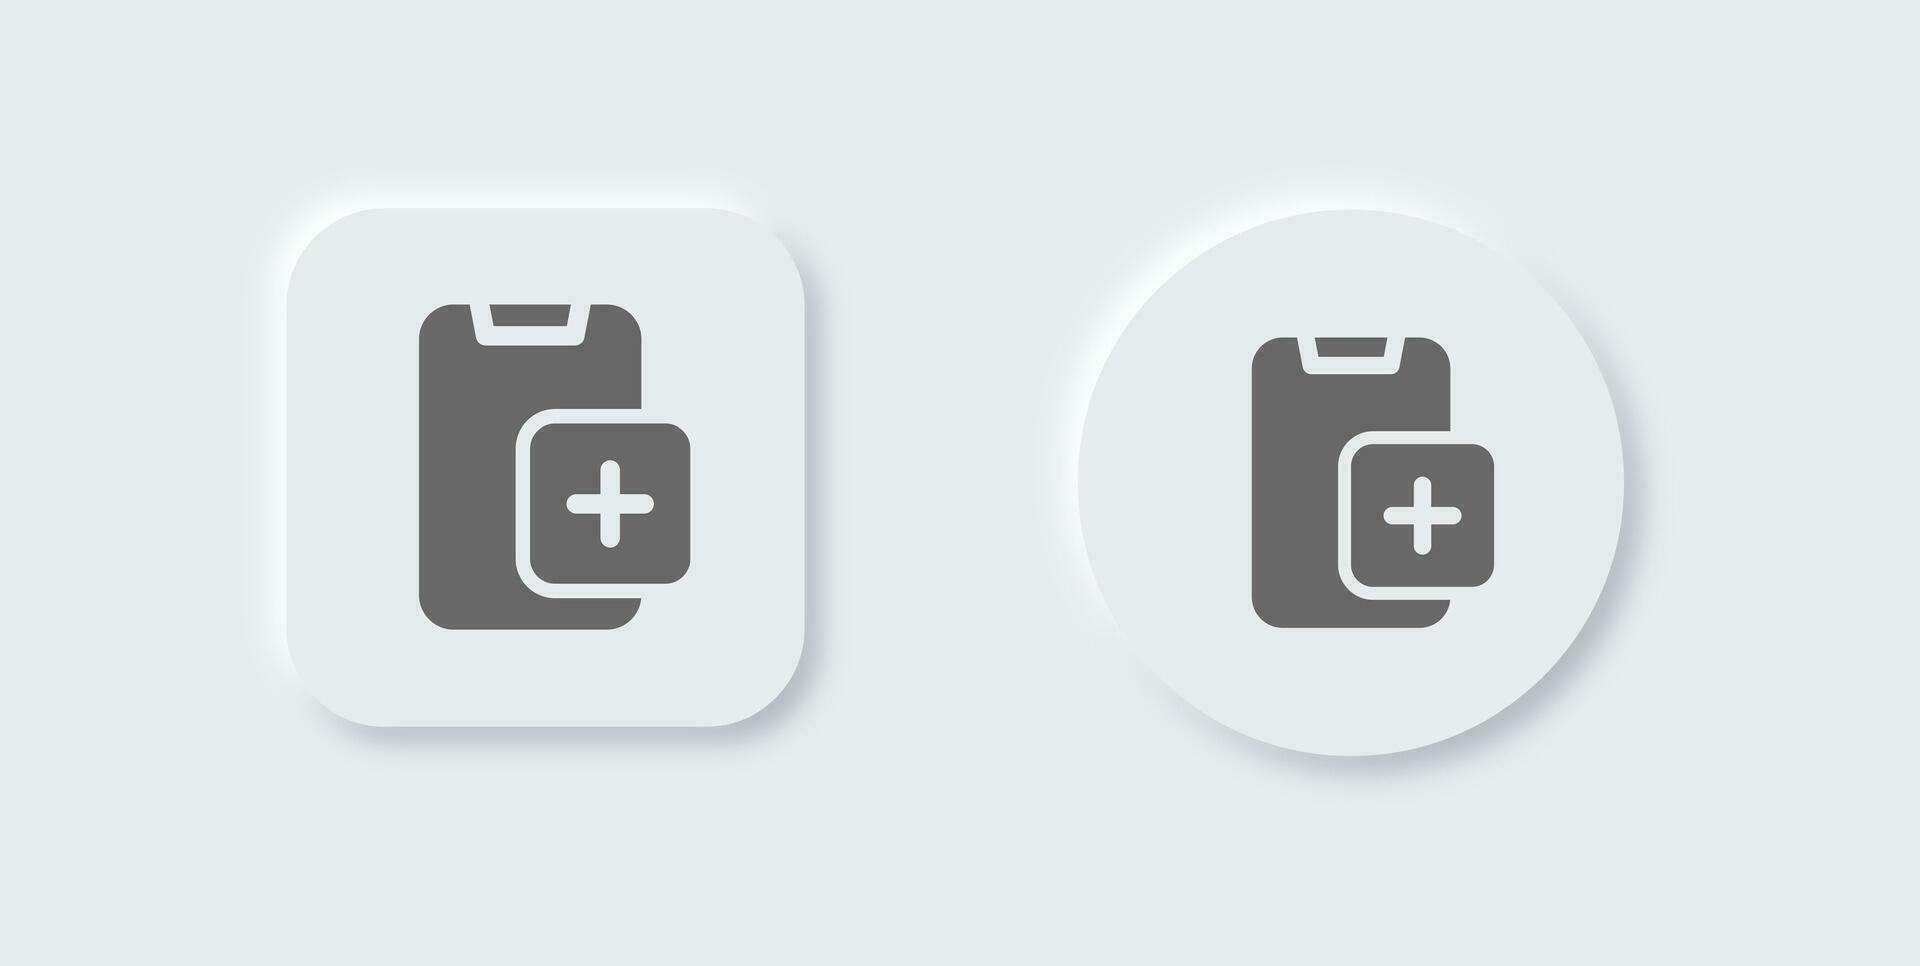 Add device solid icon in neomorphic design style. Phone signs vector illustration.